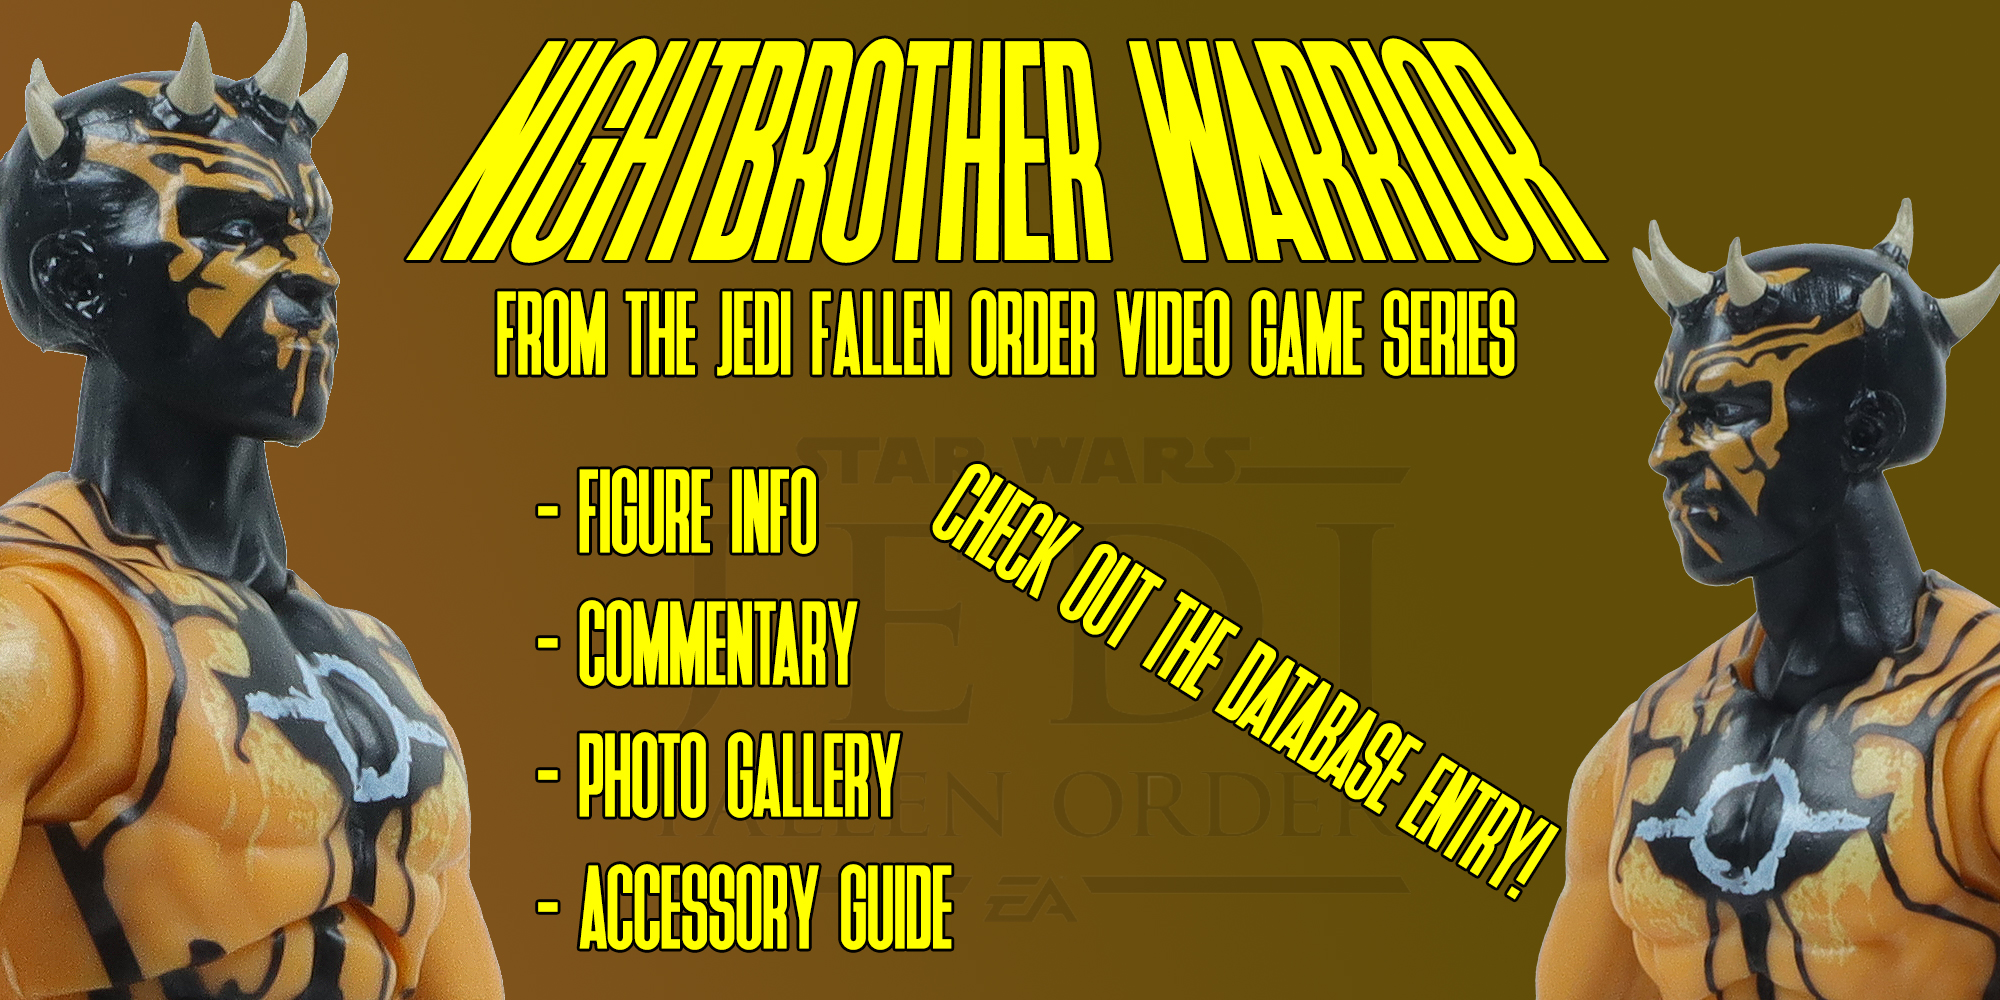 Black Series Nightbrother Warrior Archived! Take A Look!